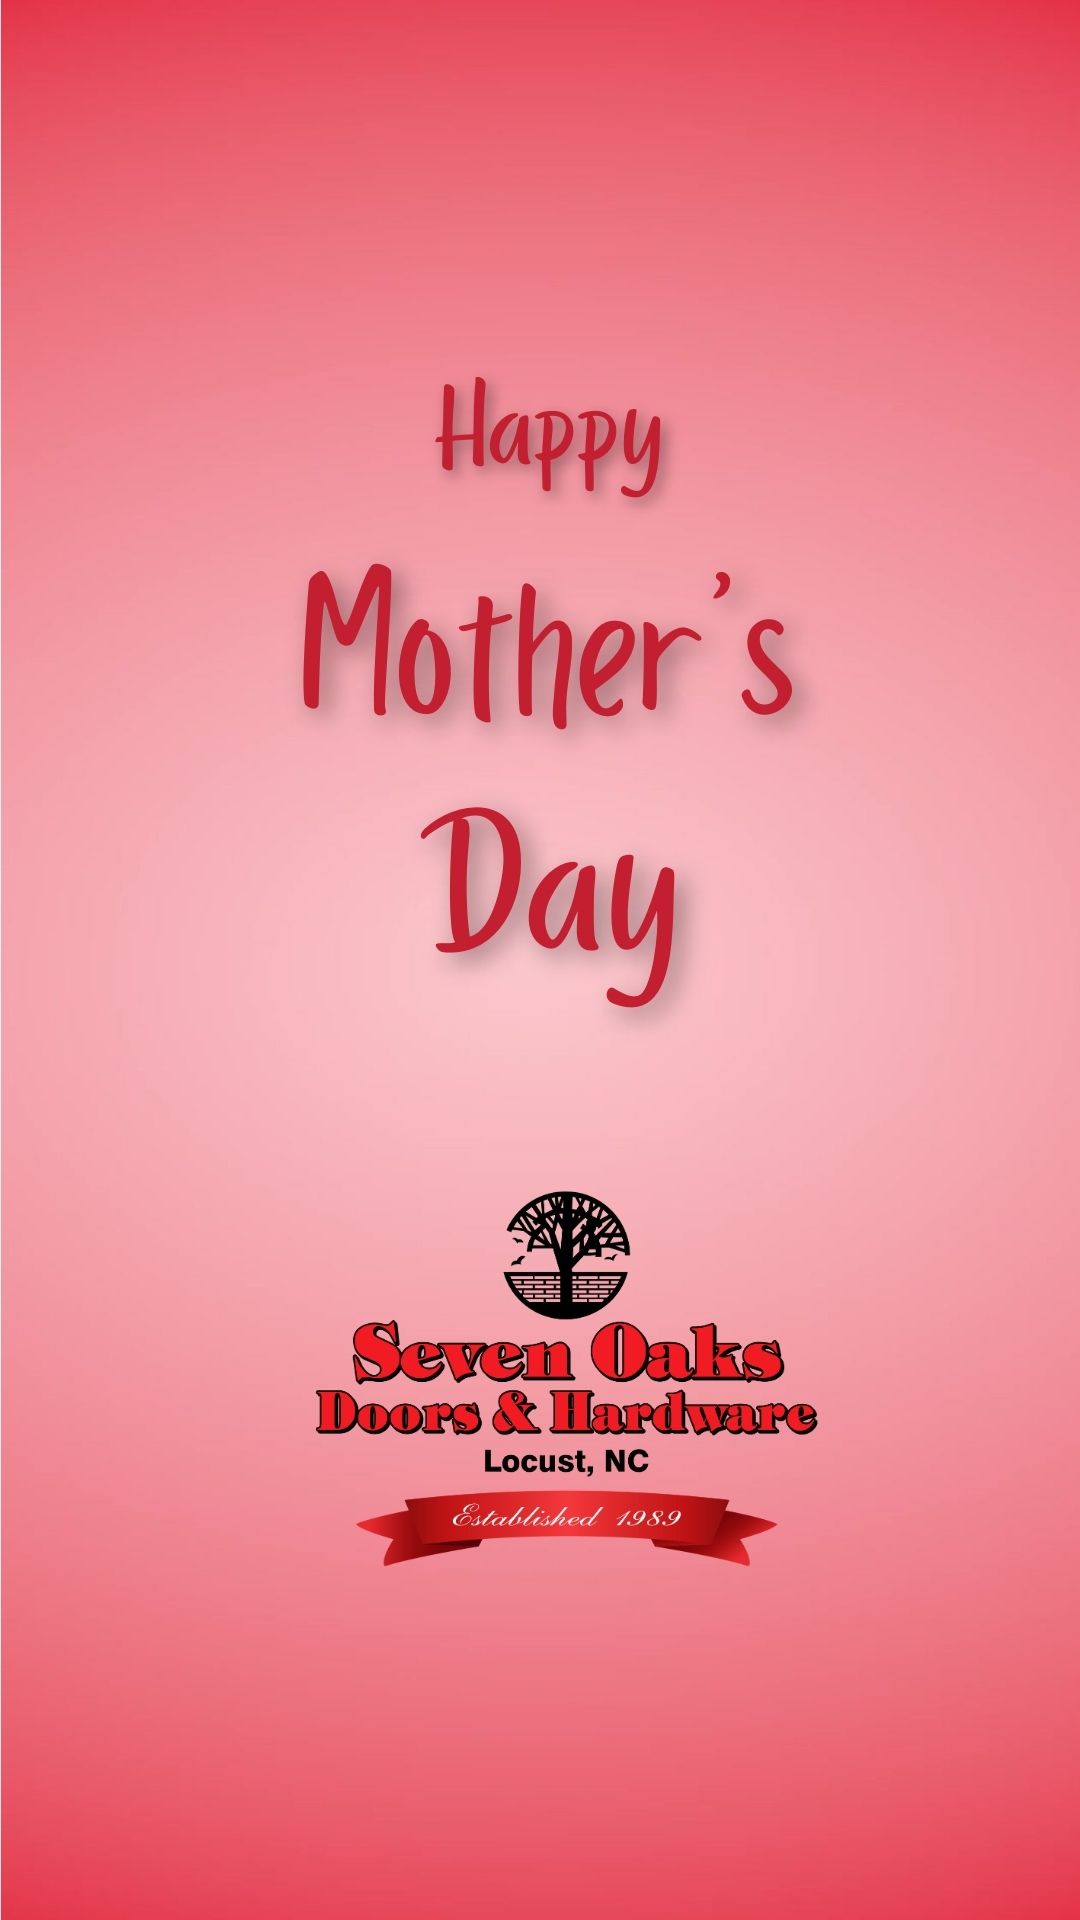 Happy Mother's Day from Seven Oaks!